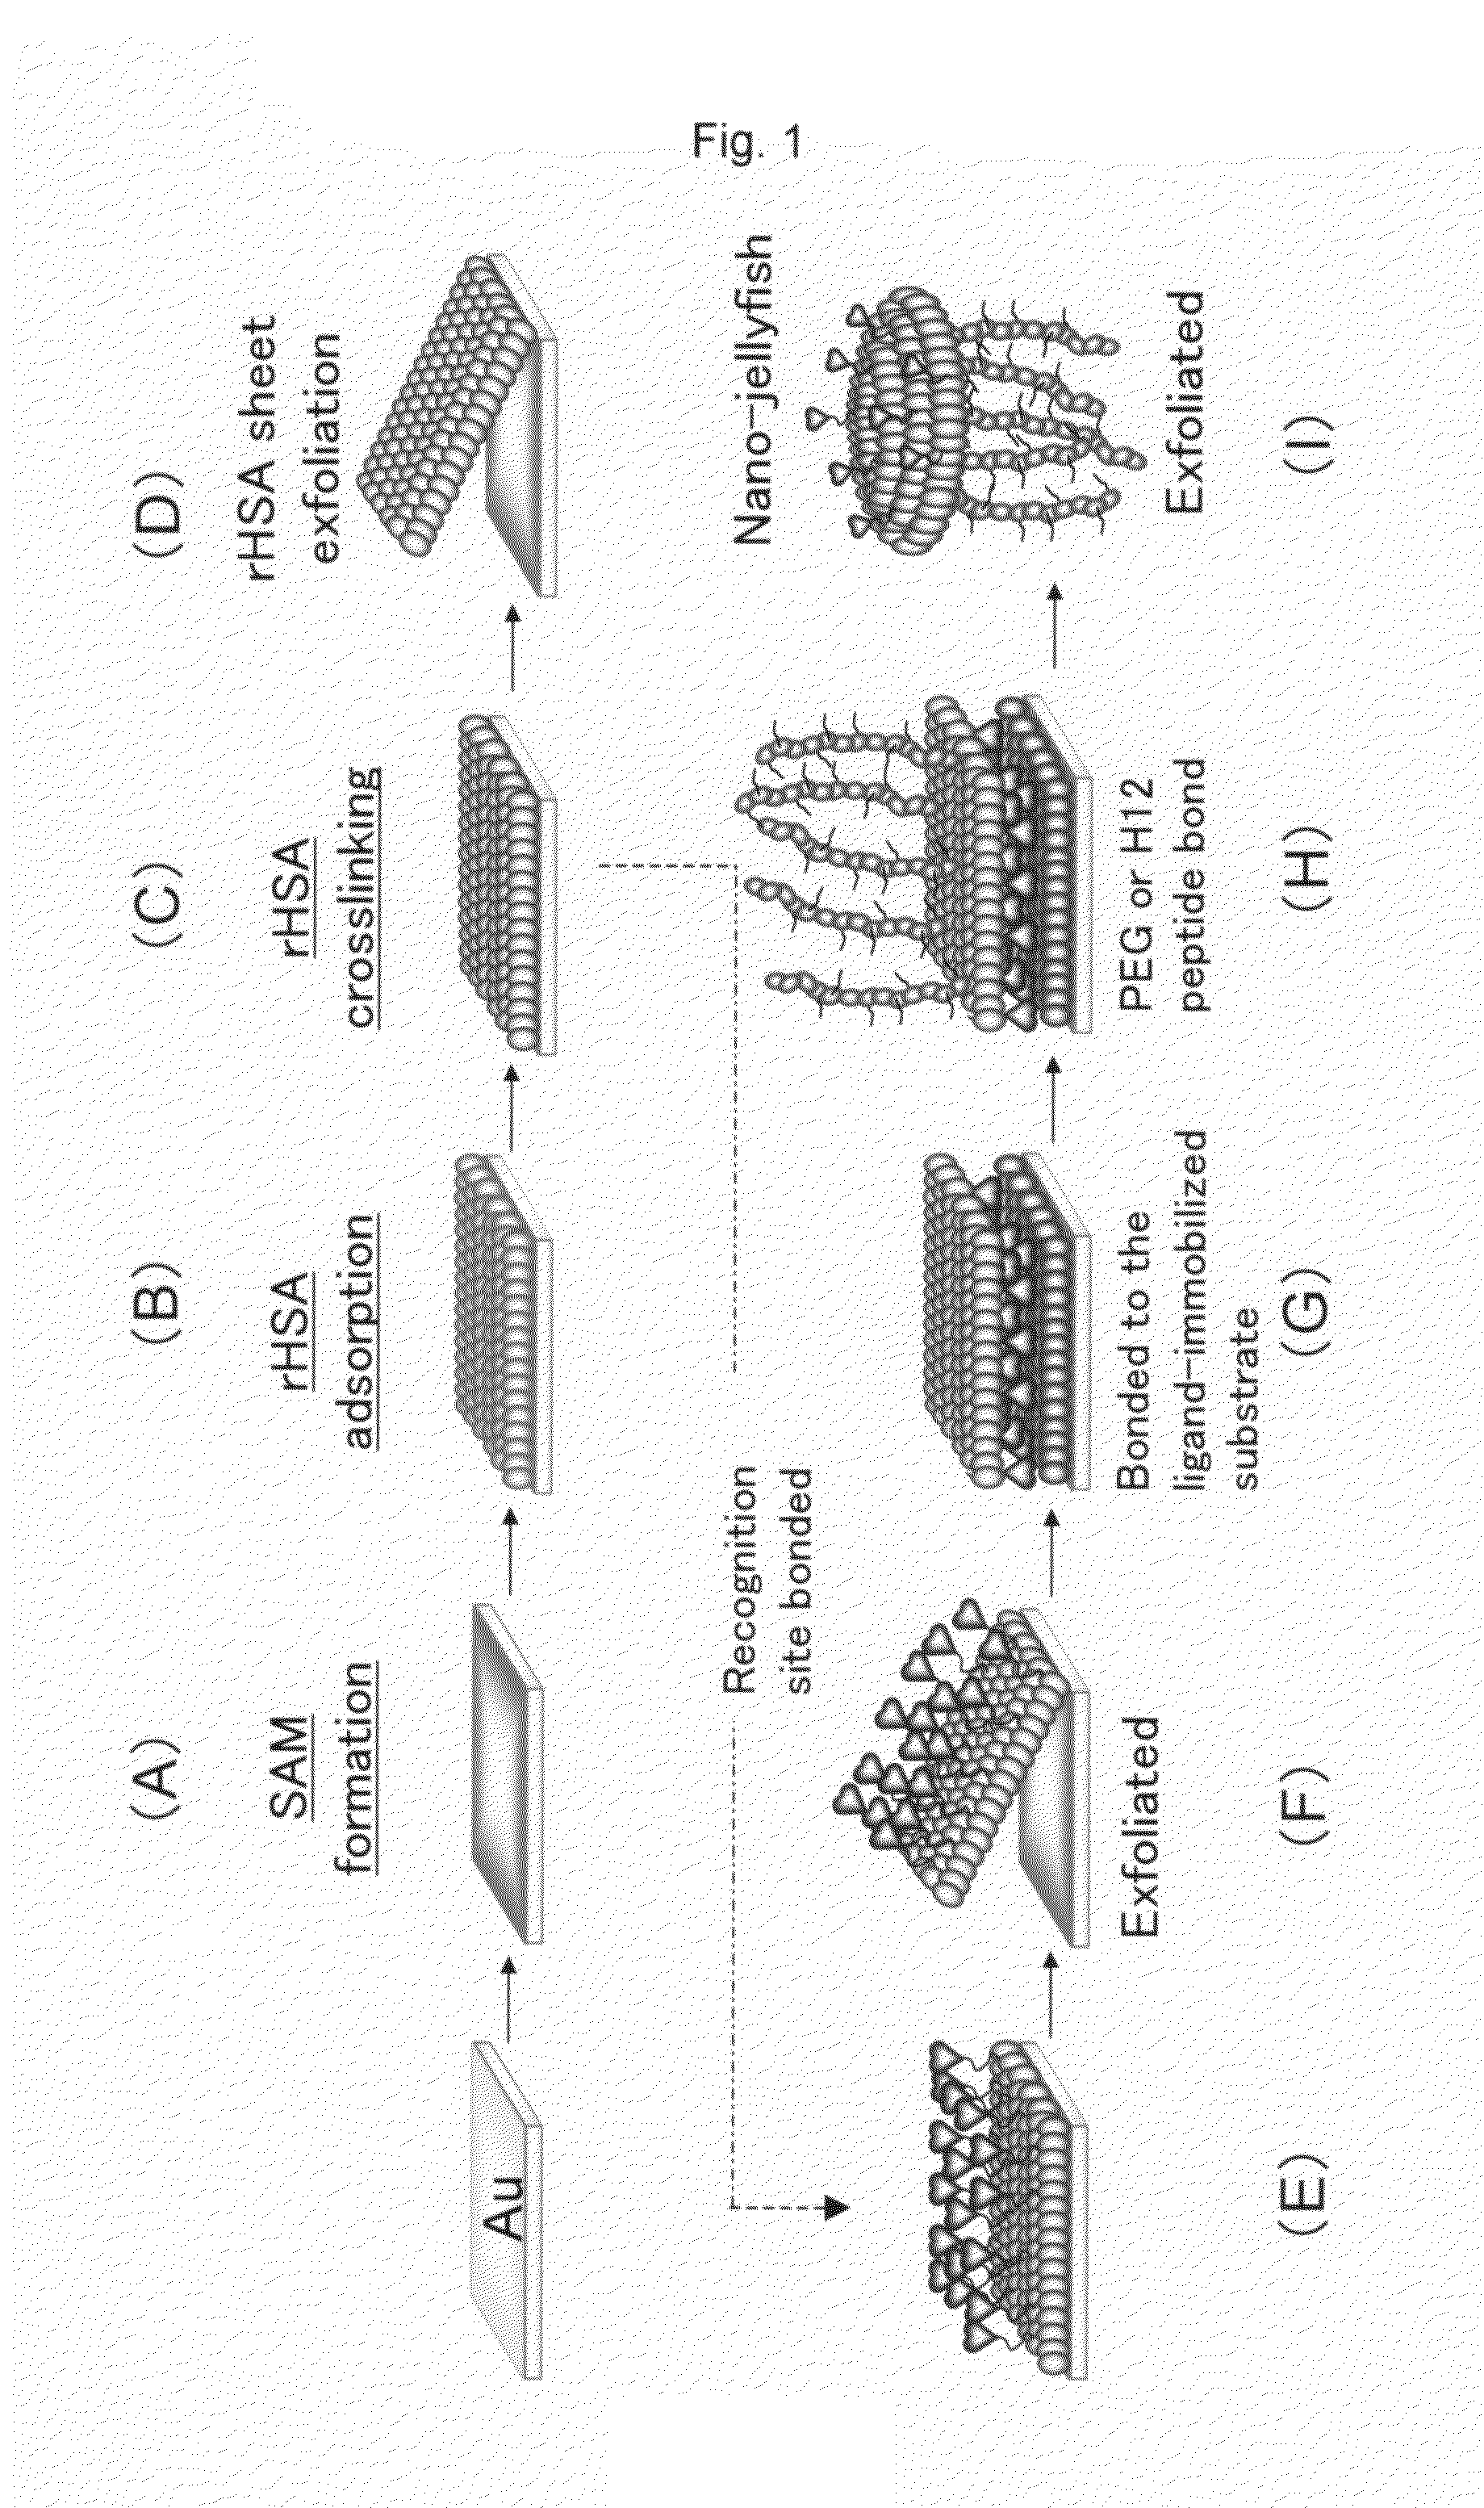 Thin-Filmy Polymeric Structure and Method of Preparing the Same